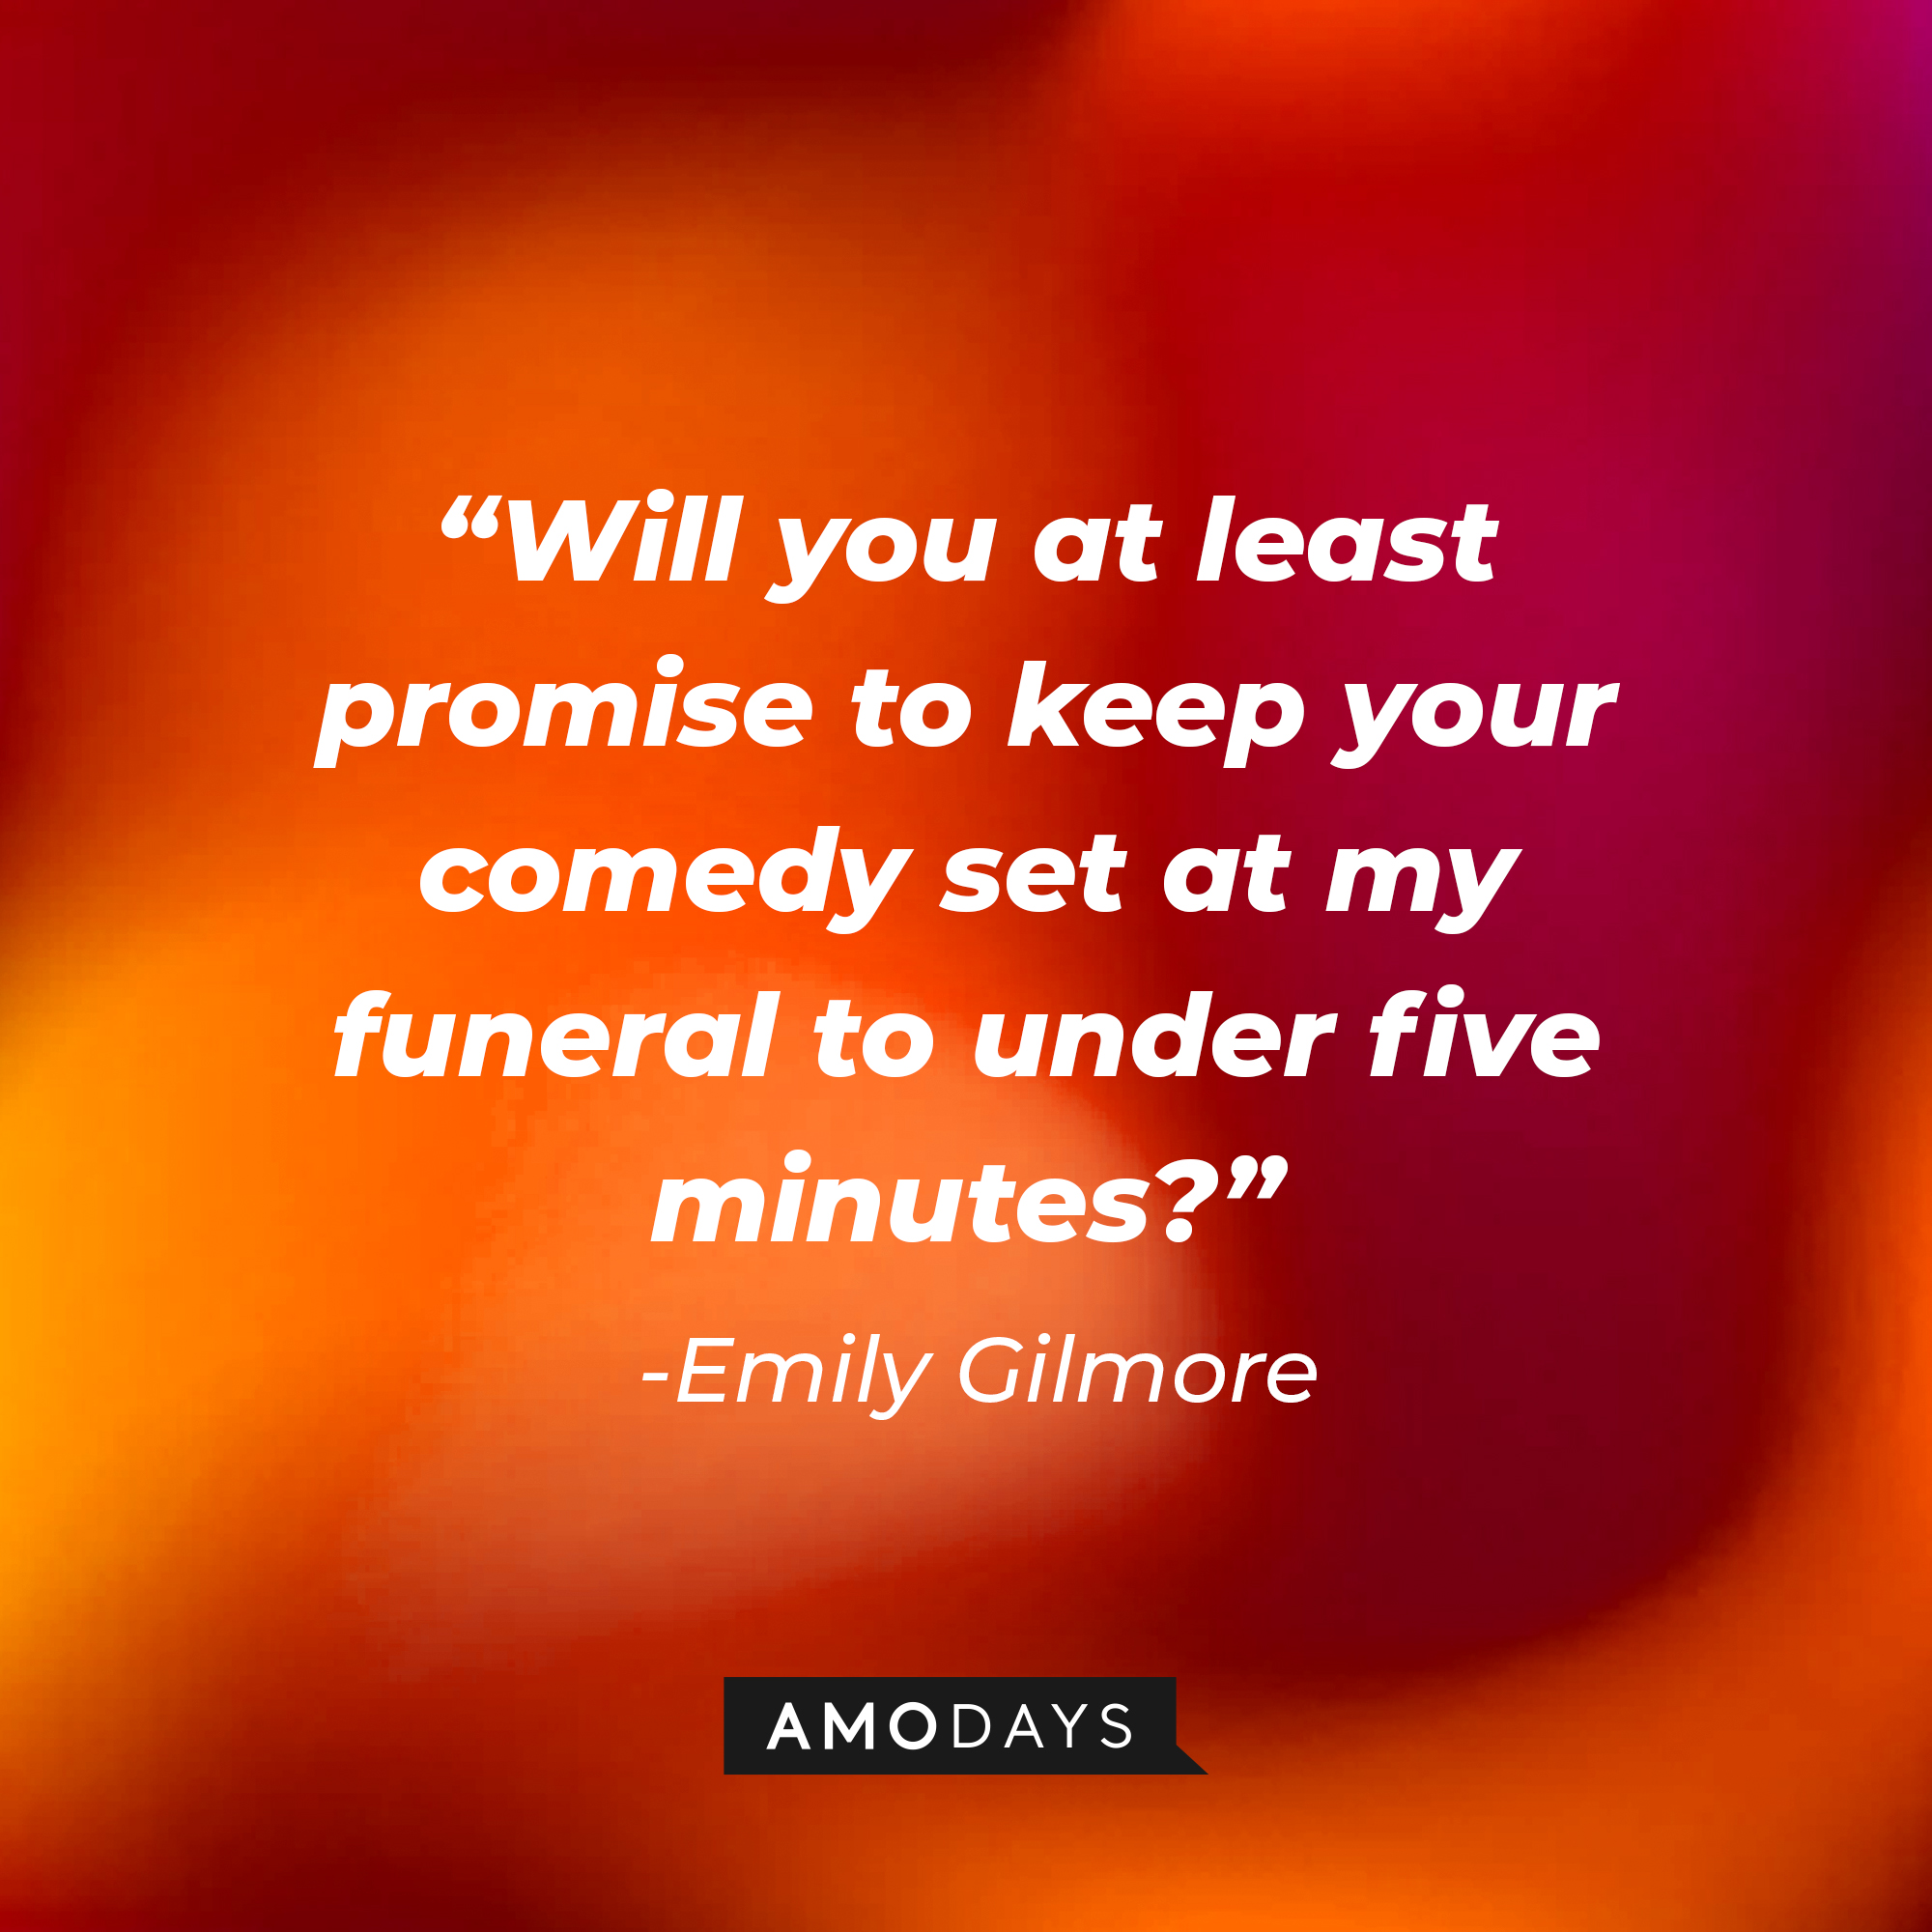 Emily Gilmore's quote: "Will you at least promise to keep your comedy set at my funeral to under five minutes?" | Source: Amodays